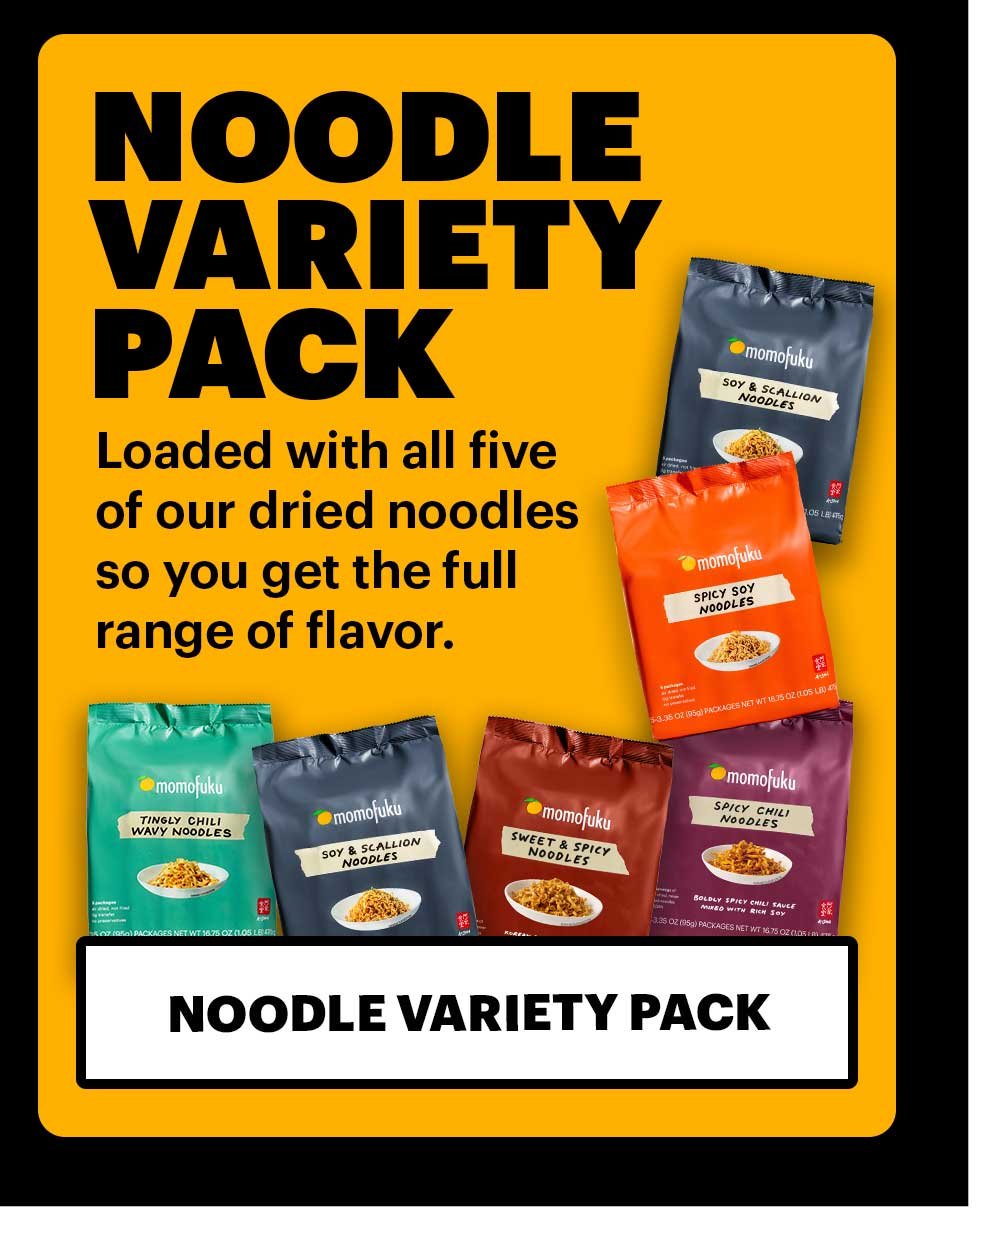 NOODLE VARIETY PACK. Loaded with all five of our dried noodles so you get the full range of flavor. NOODLE VARIETY PACK